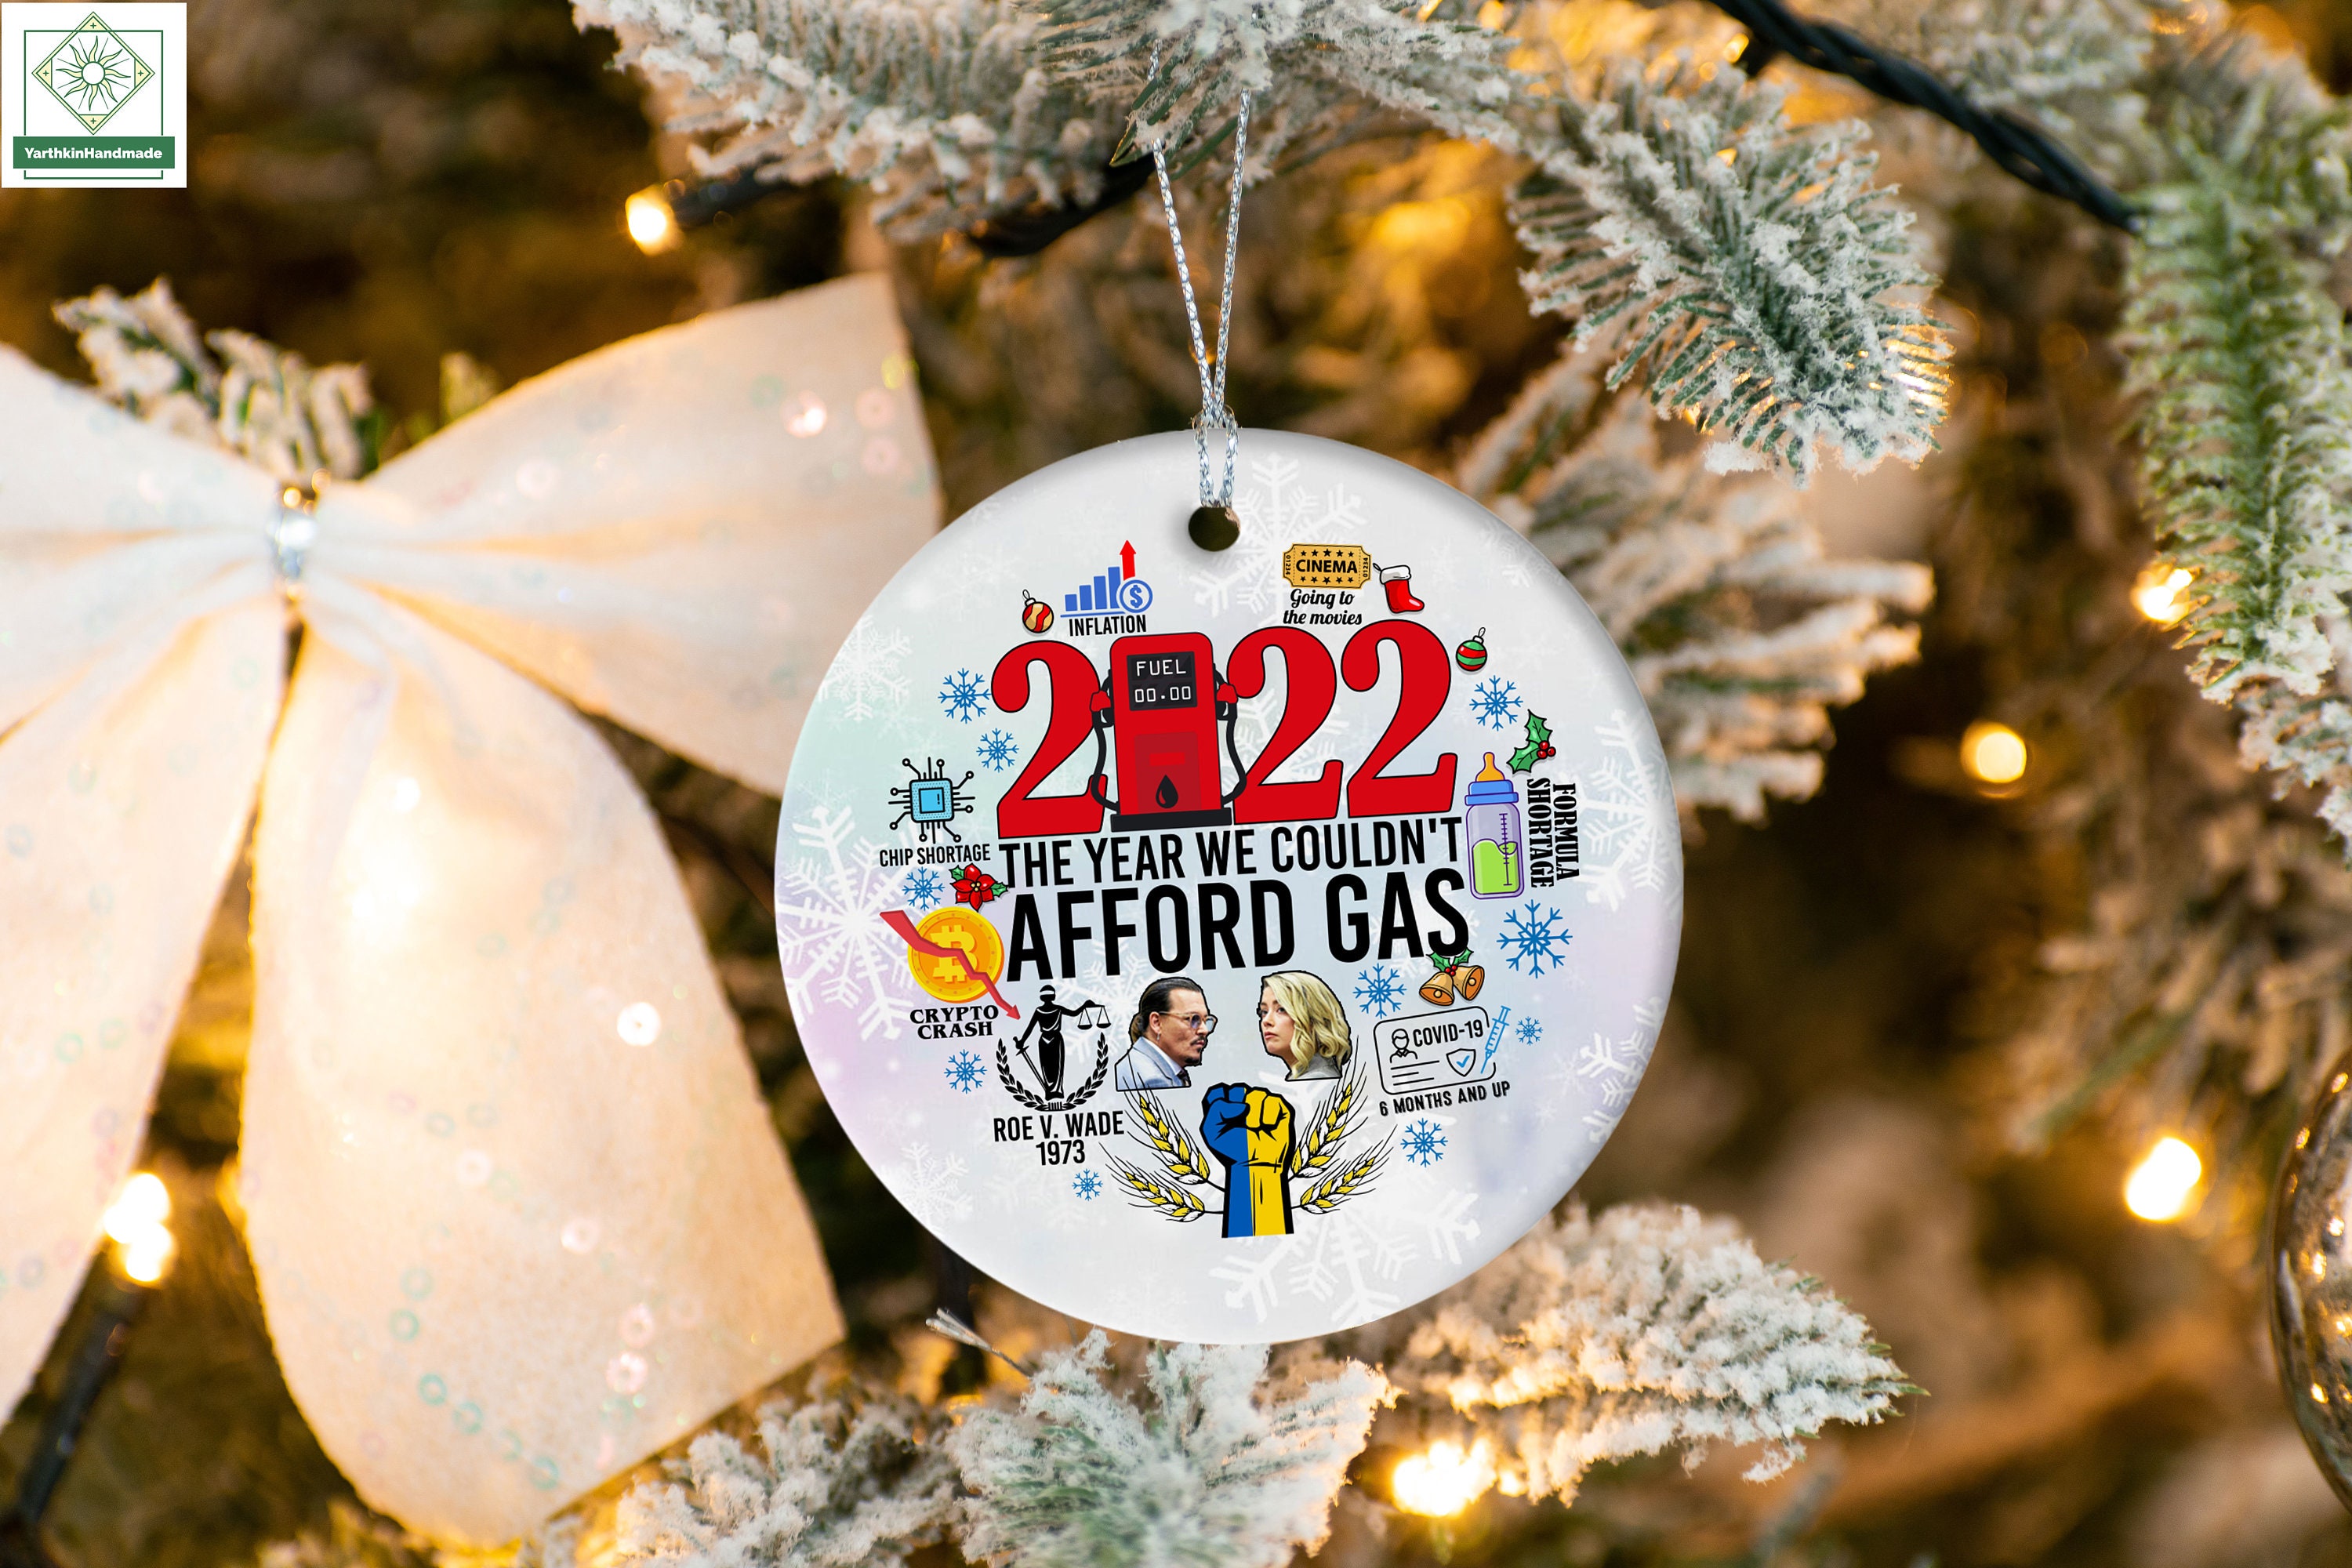 The Year We Couldn't Afford Gas Ornament, 2022 Gas Prices Ornament, Inflation Ornament